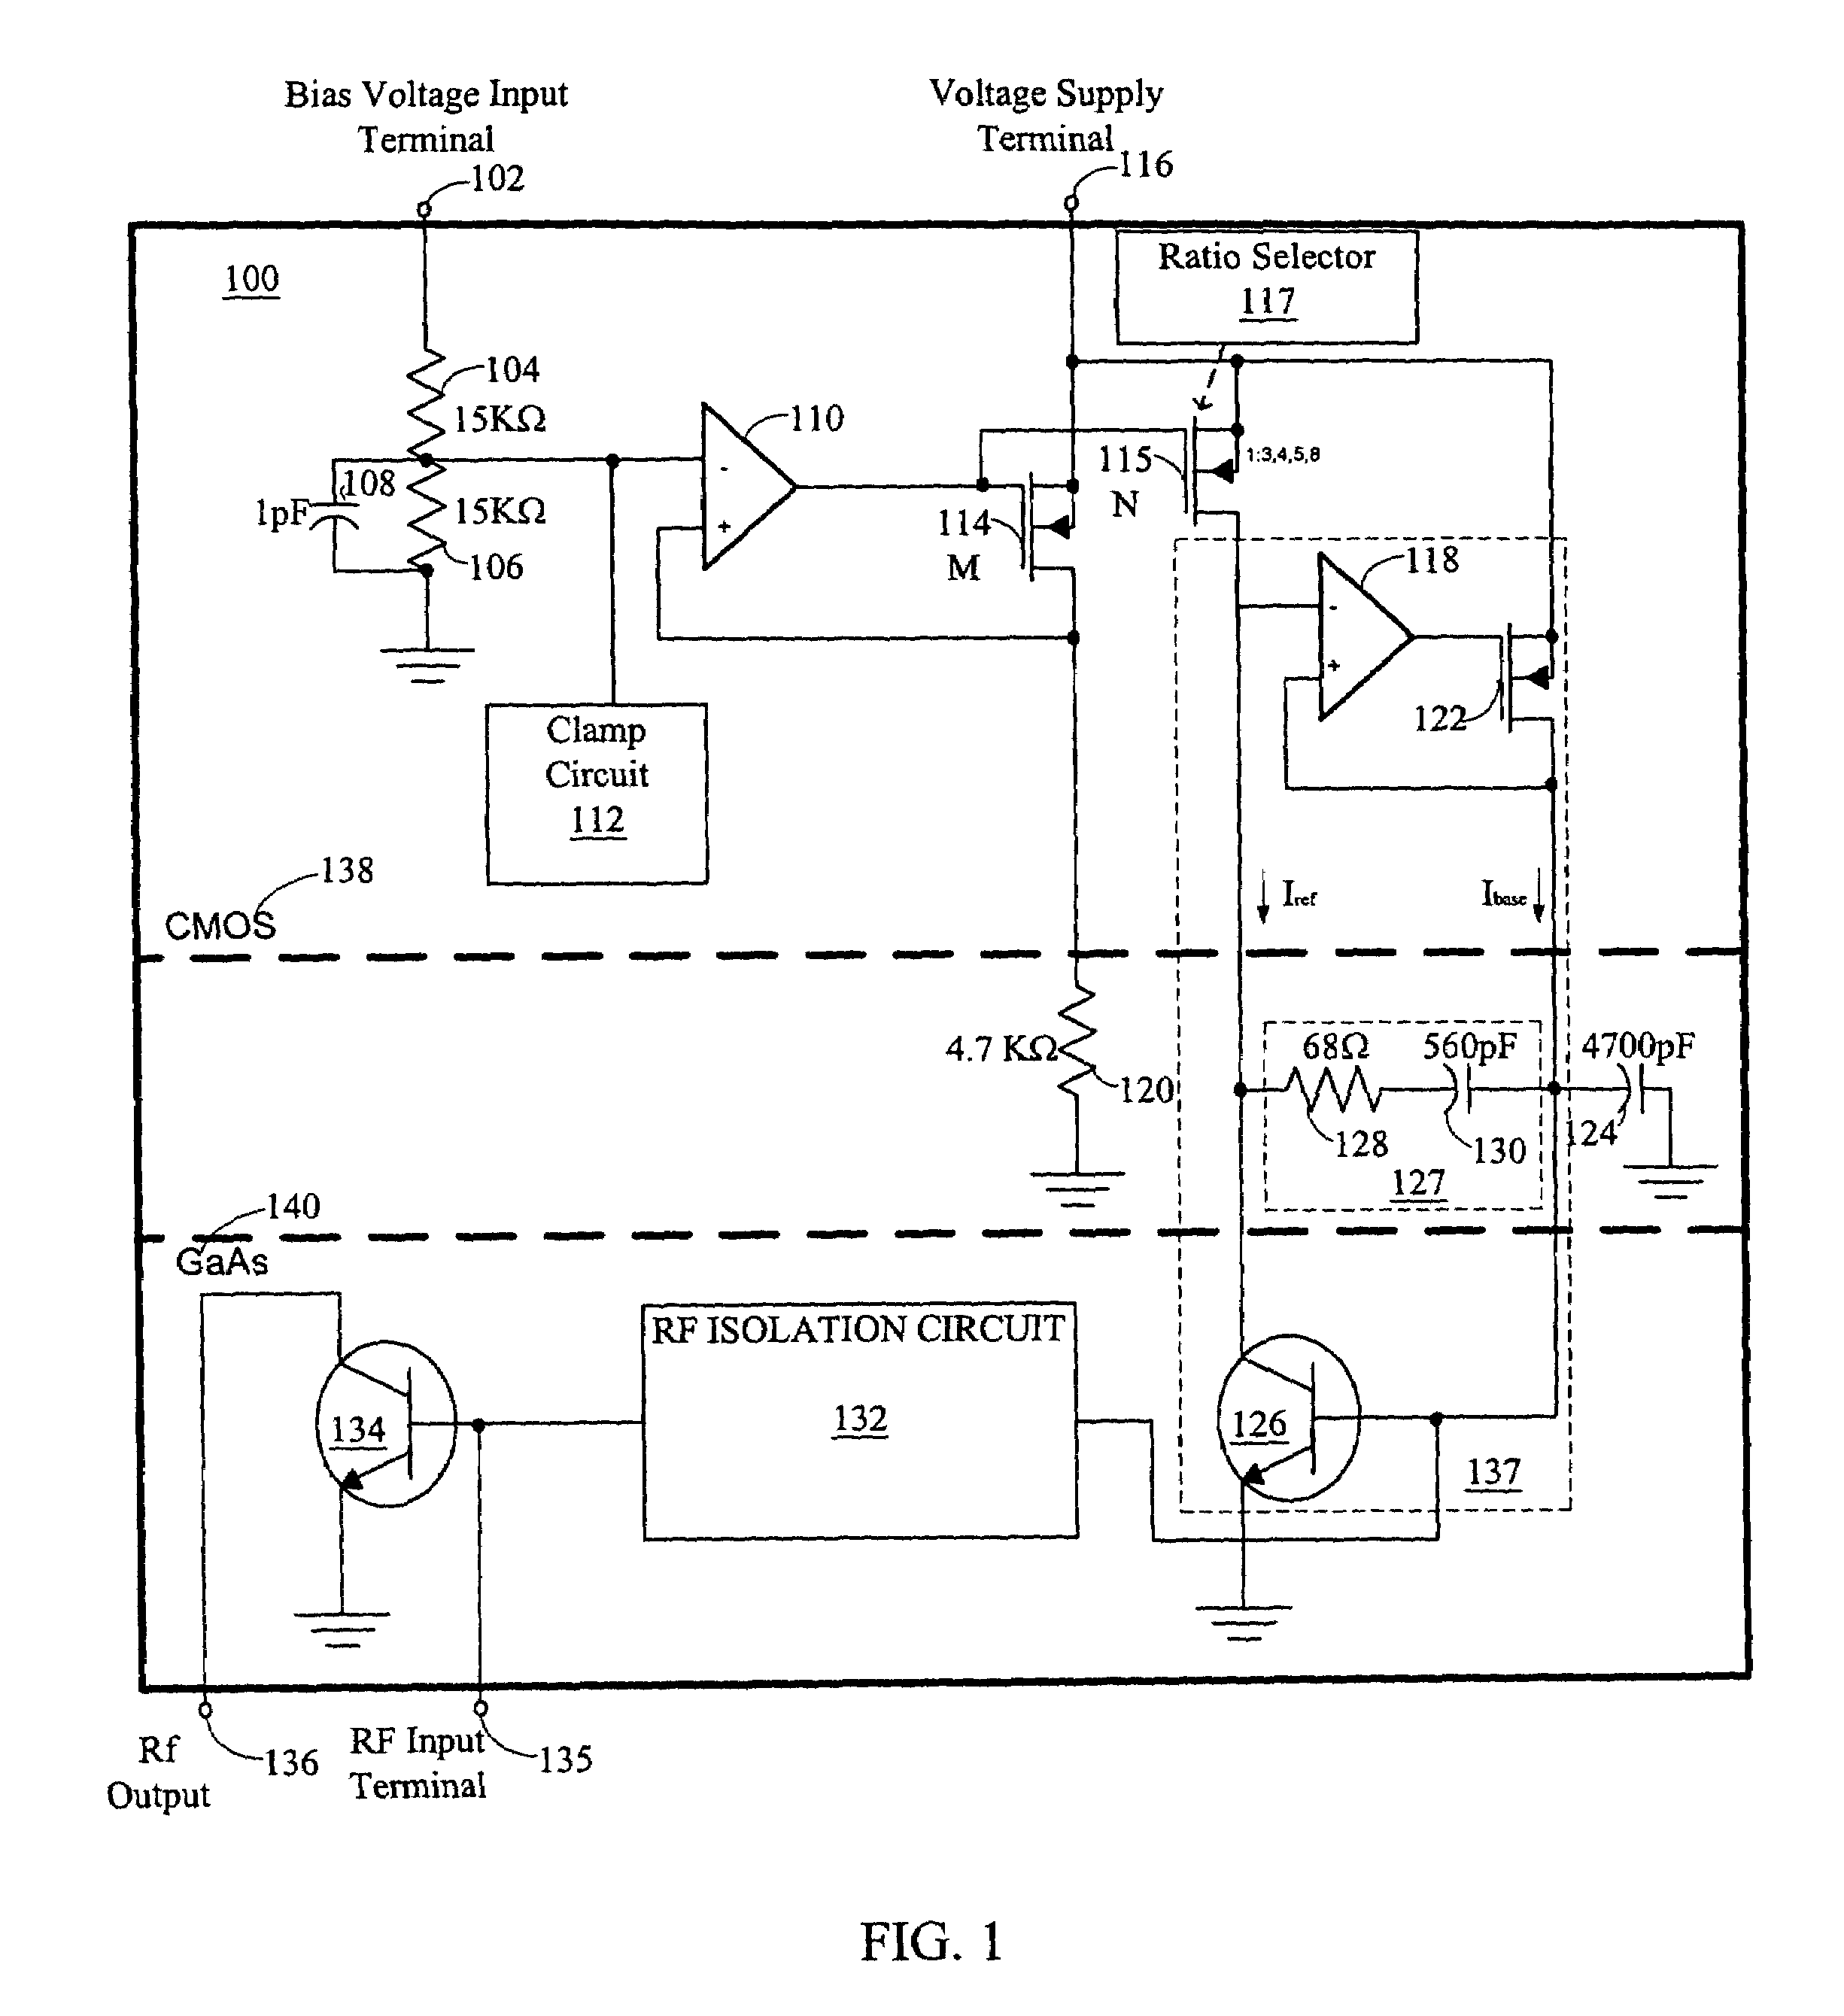 Constant current biasing circuit for linear power amplifiers